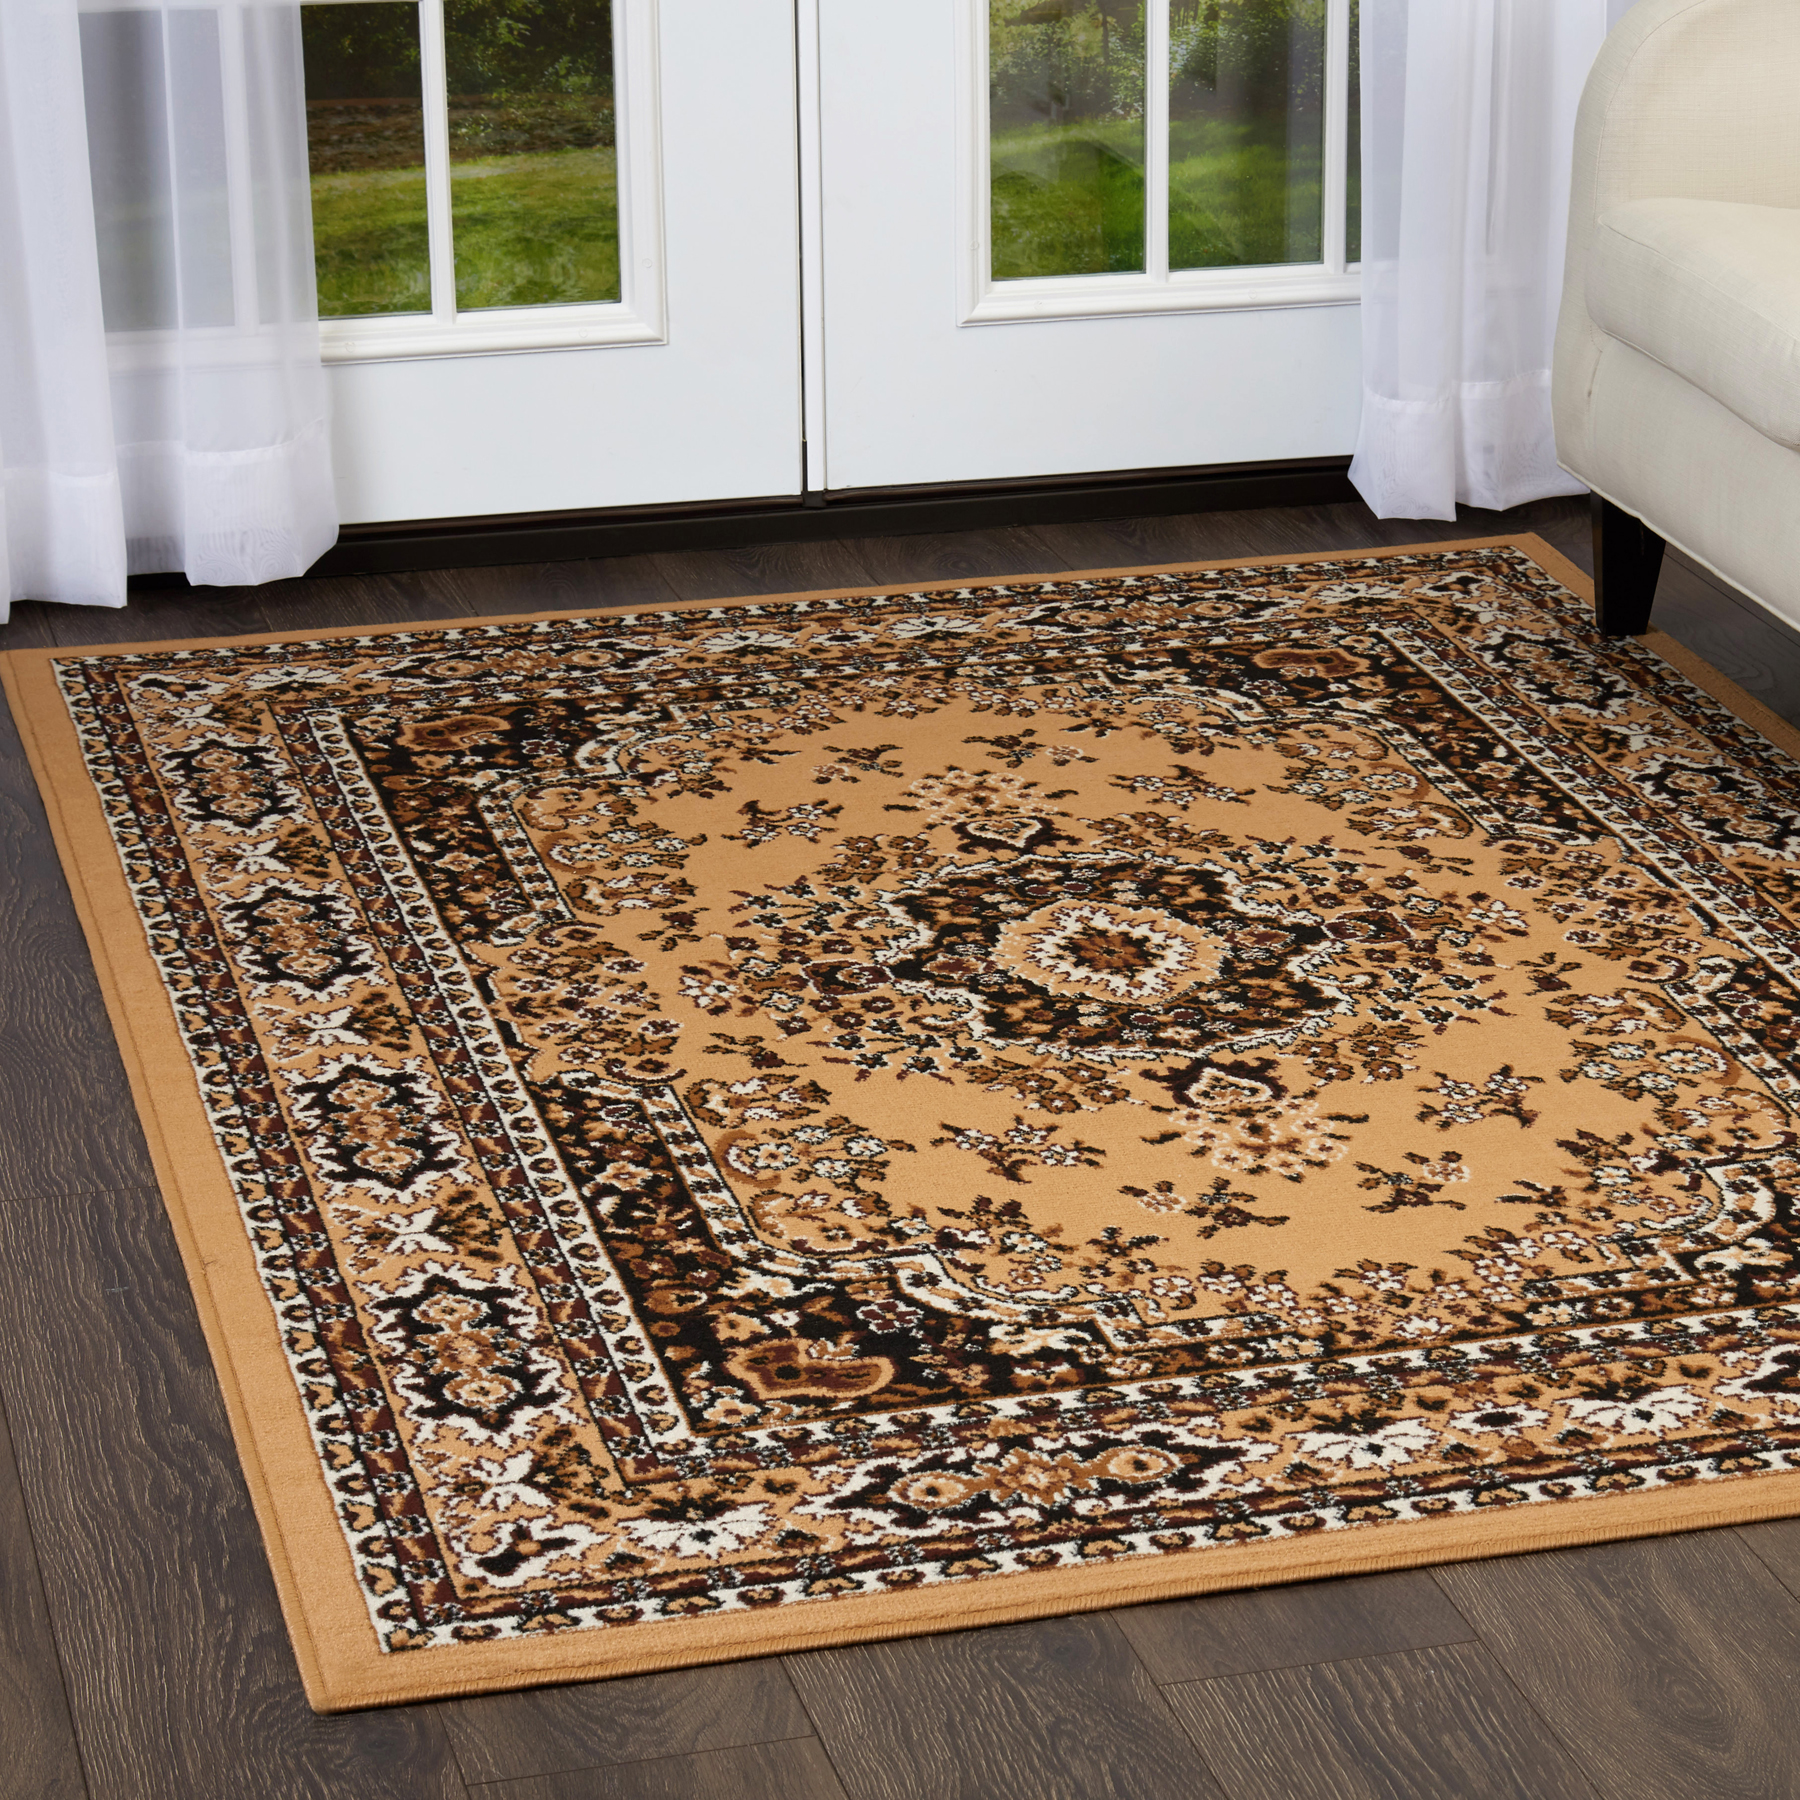 Dynamix Area Rugs Premium Rug 7069, Home Dynamix Area Rugs